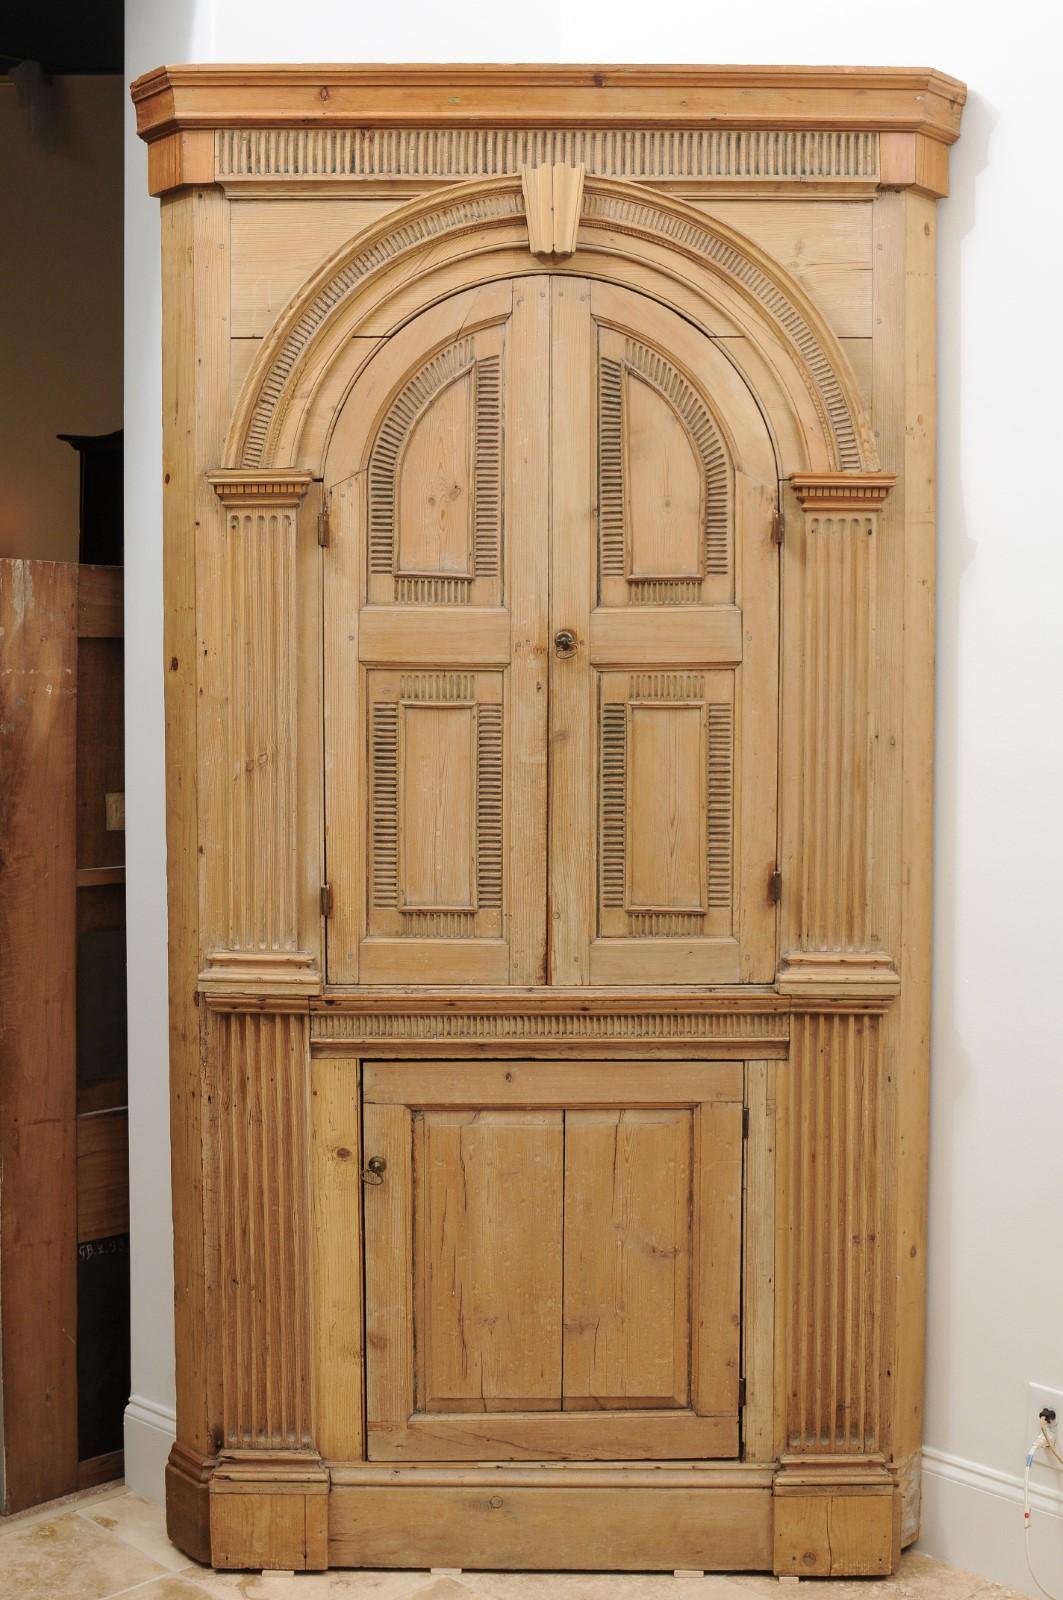 19th Century English Pine corner cupboard with arched upper cabinet above lower cabinet door.